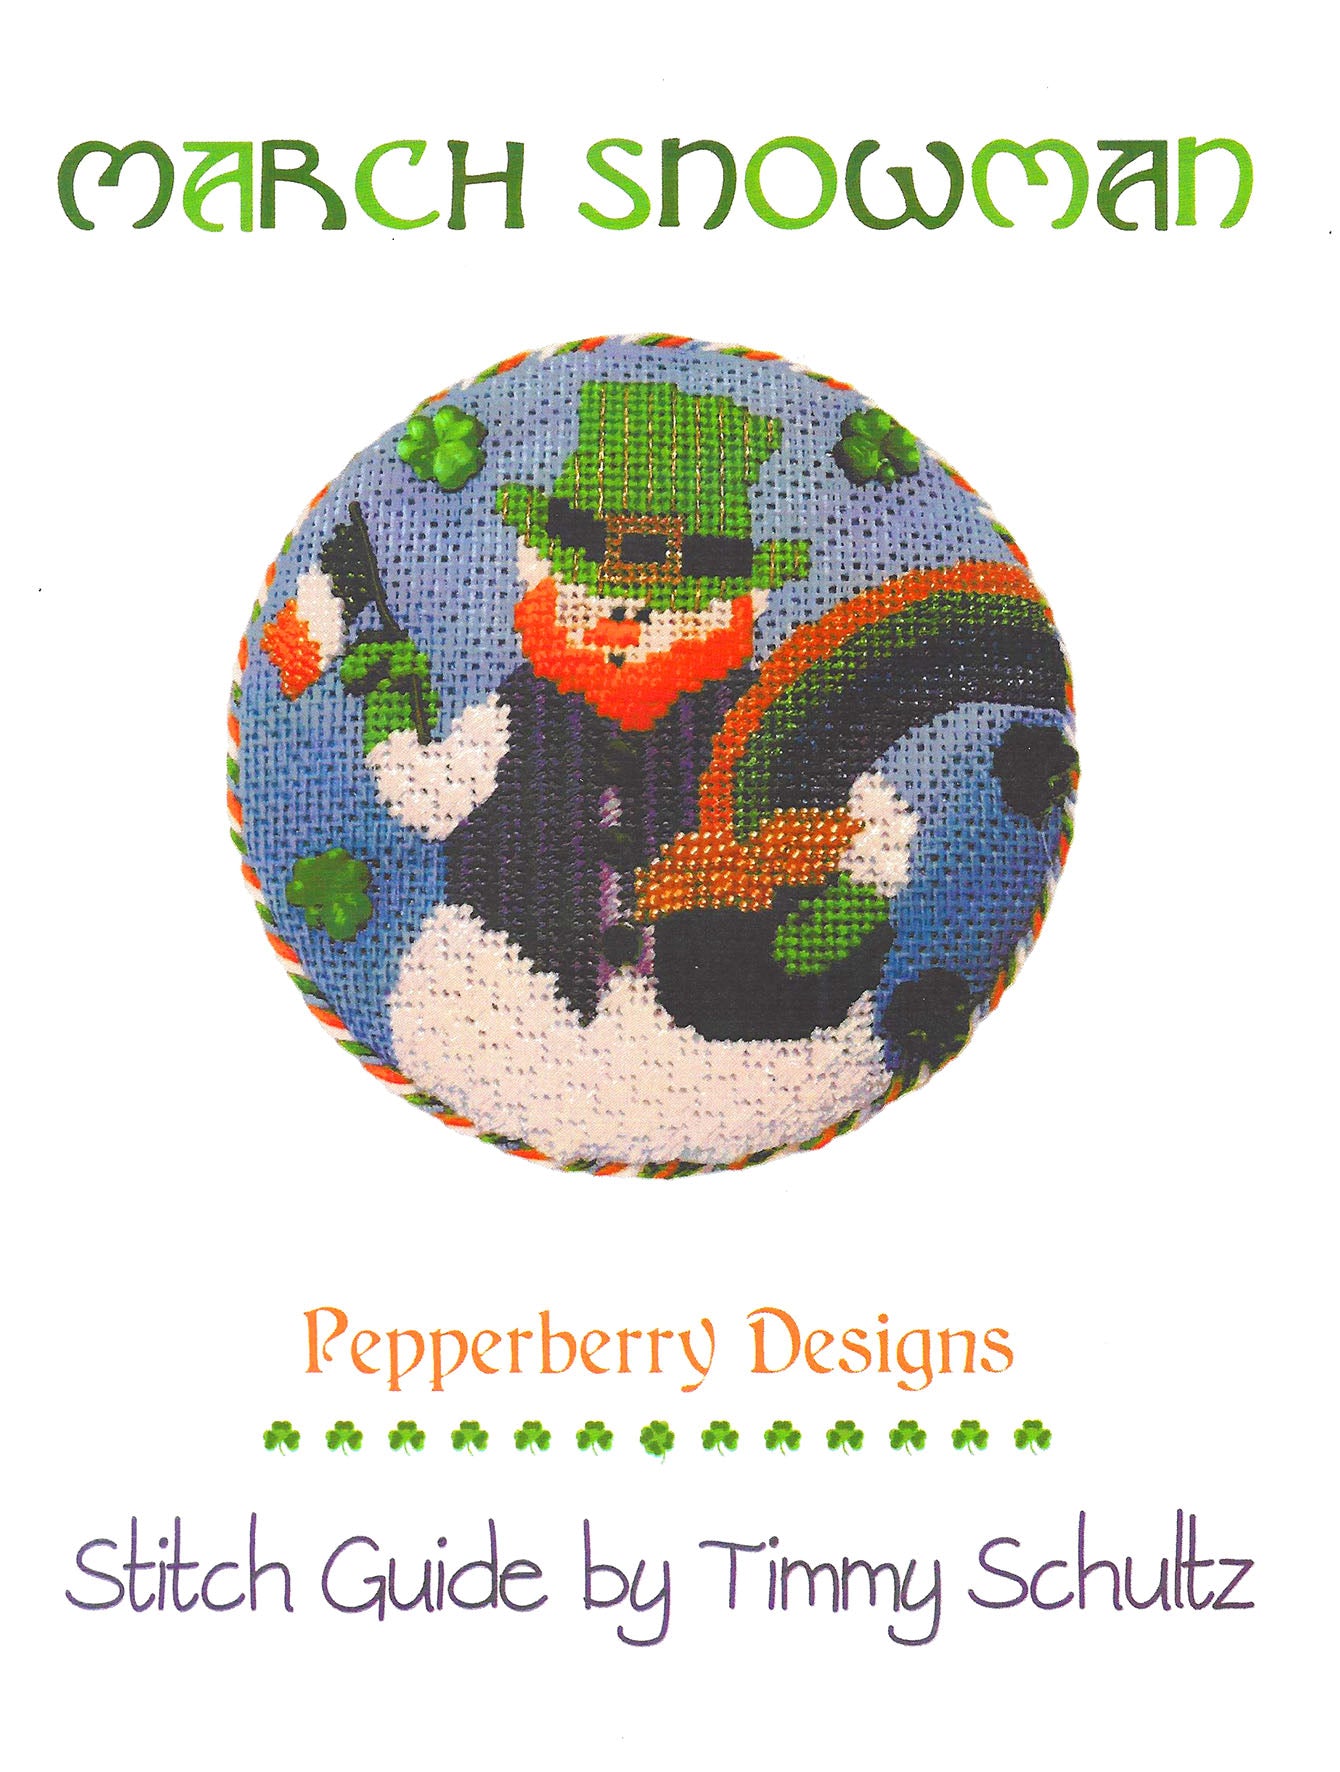 Round ~ March Irish Snowman on 18 Mesh handpainted Needlepoint Canvas & STITCH GUIDE  by Pepperberry